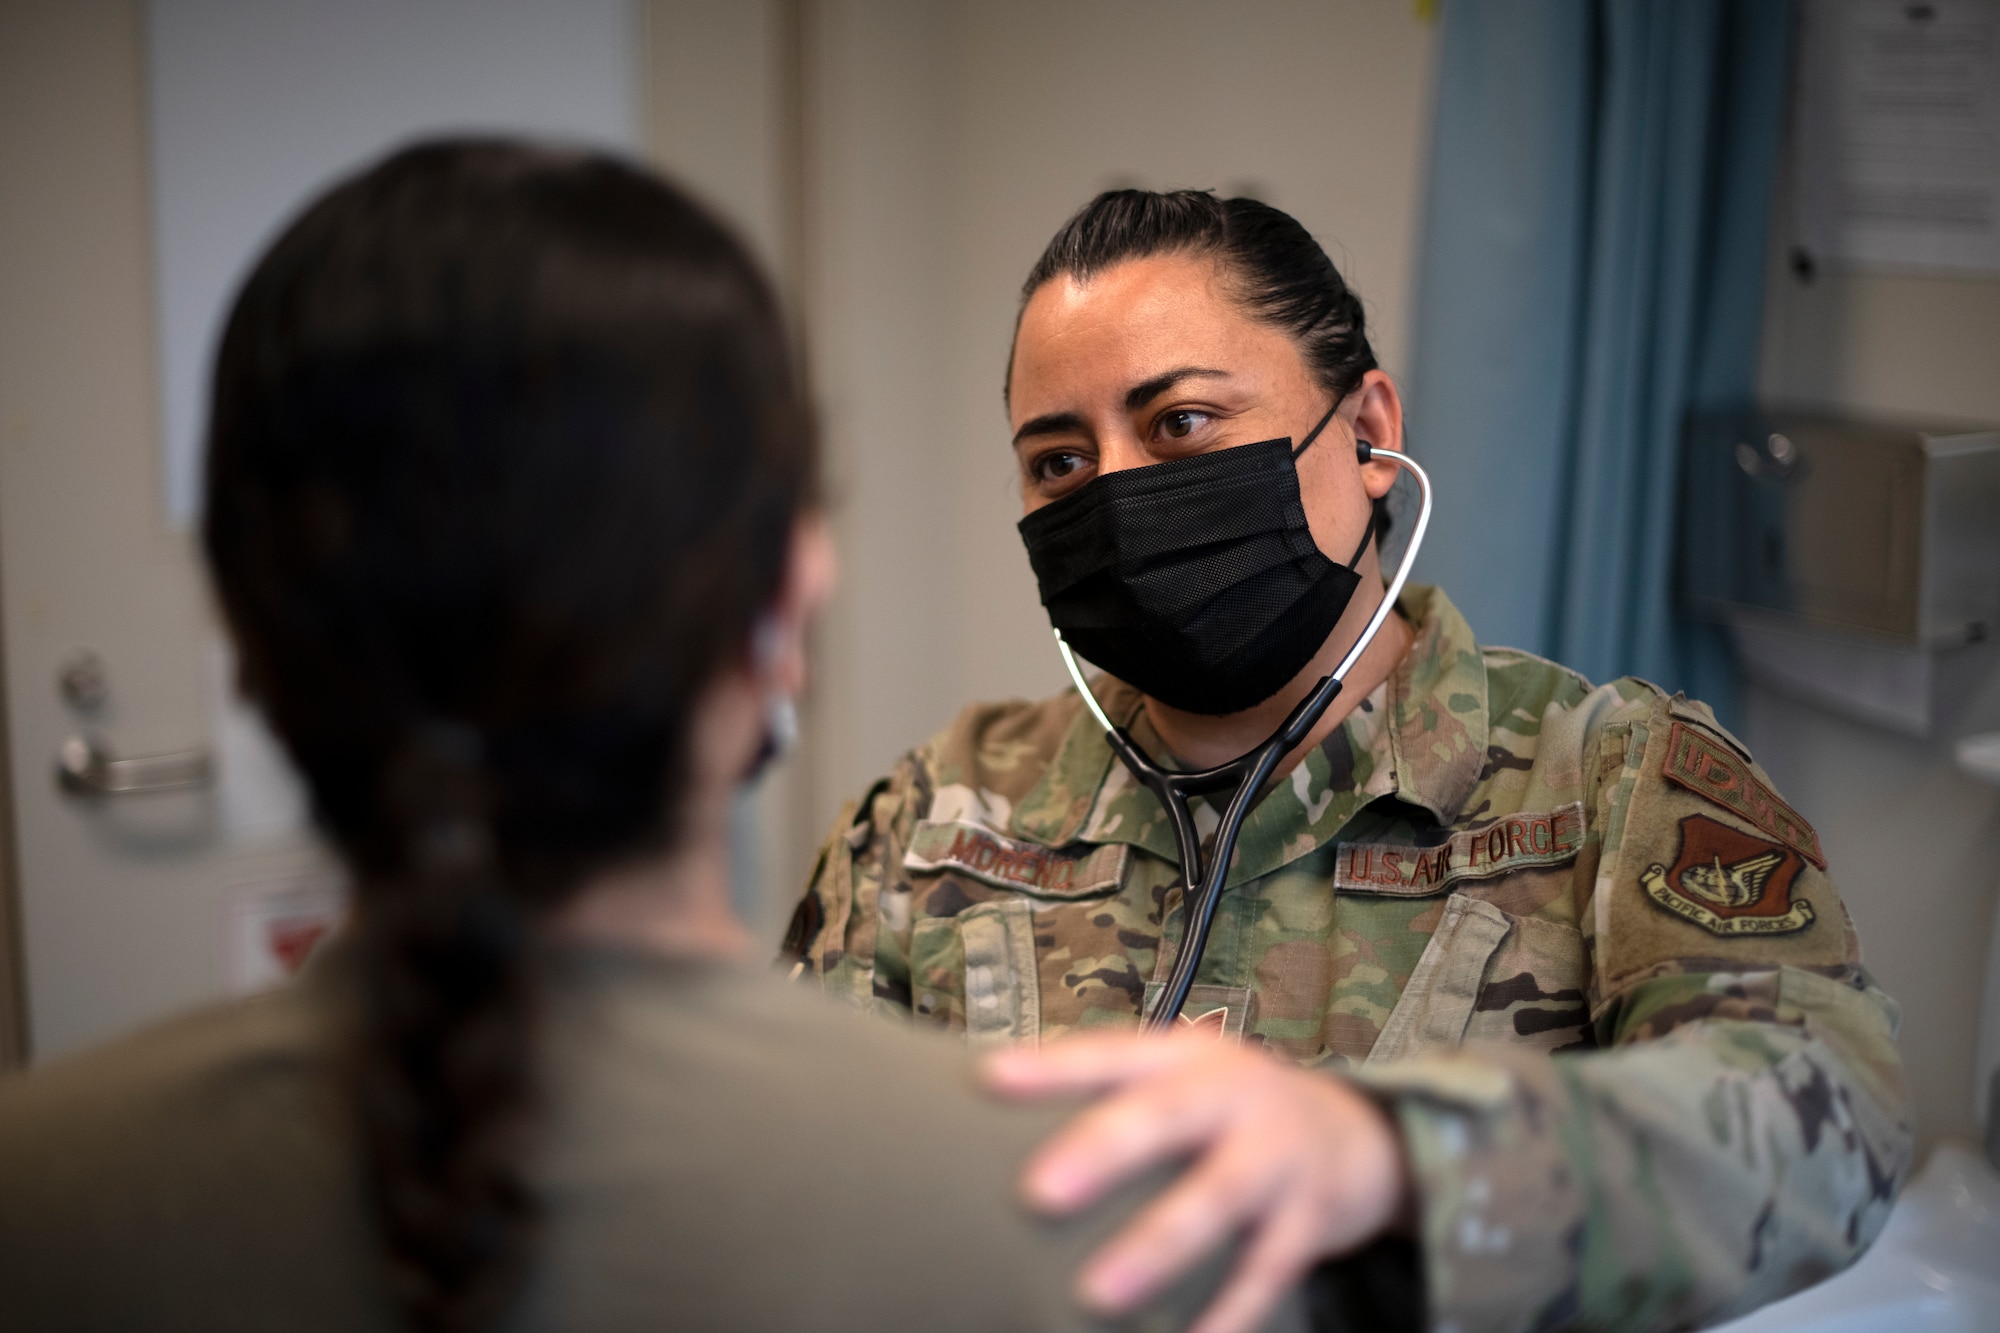 U.S. Air Force Staff Sgt. Linda Moreno, an independent duty medical technician assigned to the 44th Fighter Squadron, consults with a patient at Kadena Air Base, Japan, April 4, 2022.  Before joining the Air Force, Moreno worked as a civilian emergency medical technician. (U.S. Air Force photo by Senior Airman Jessi Monte)